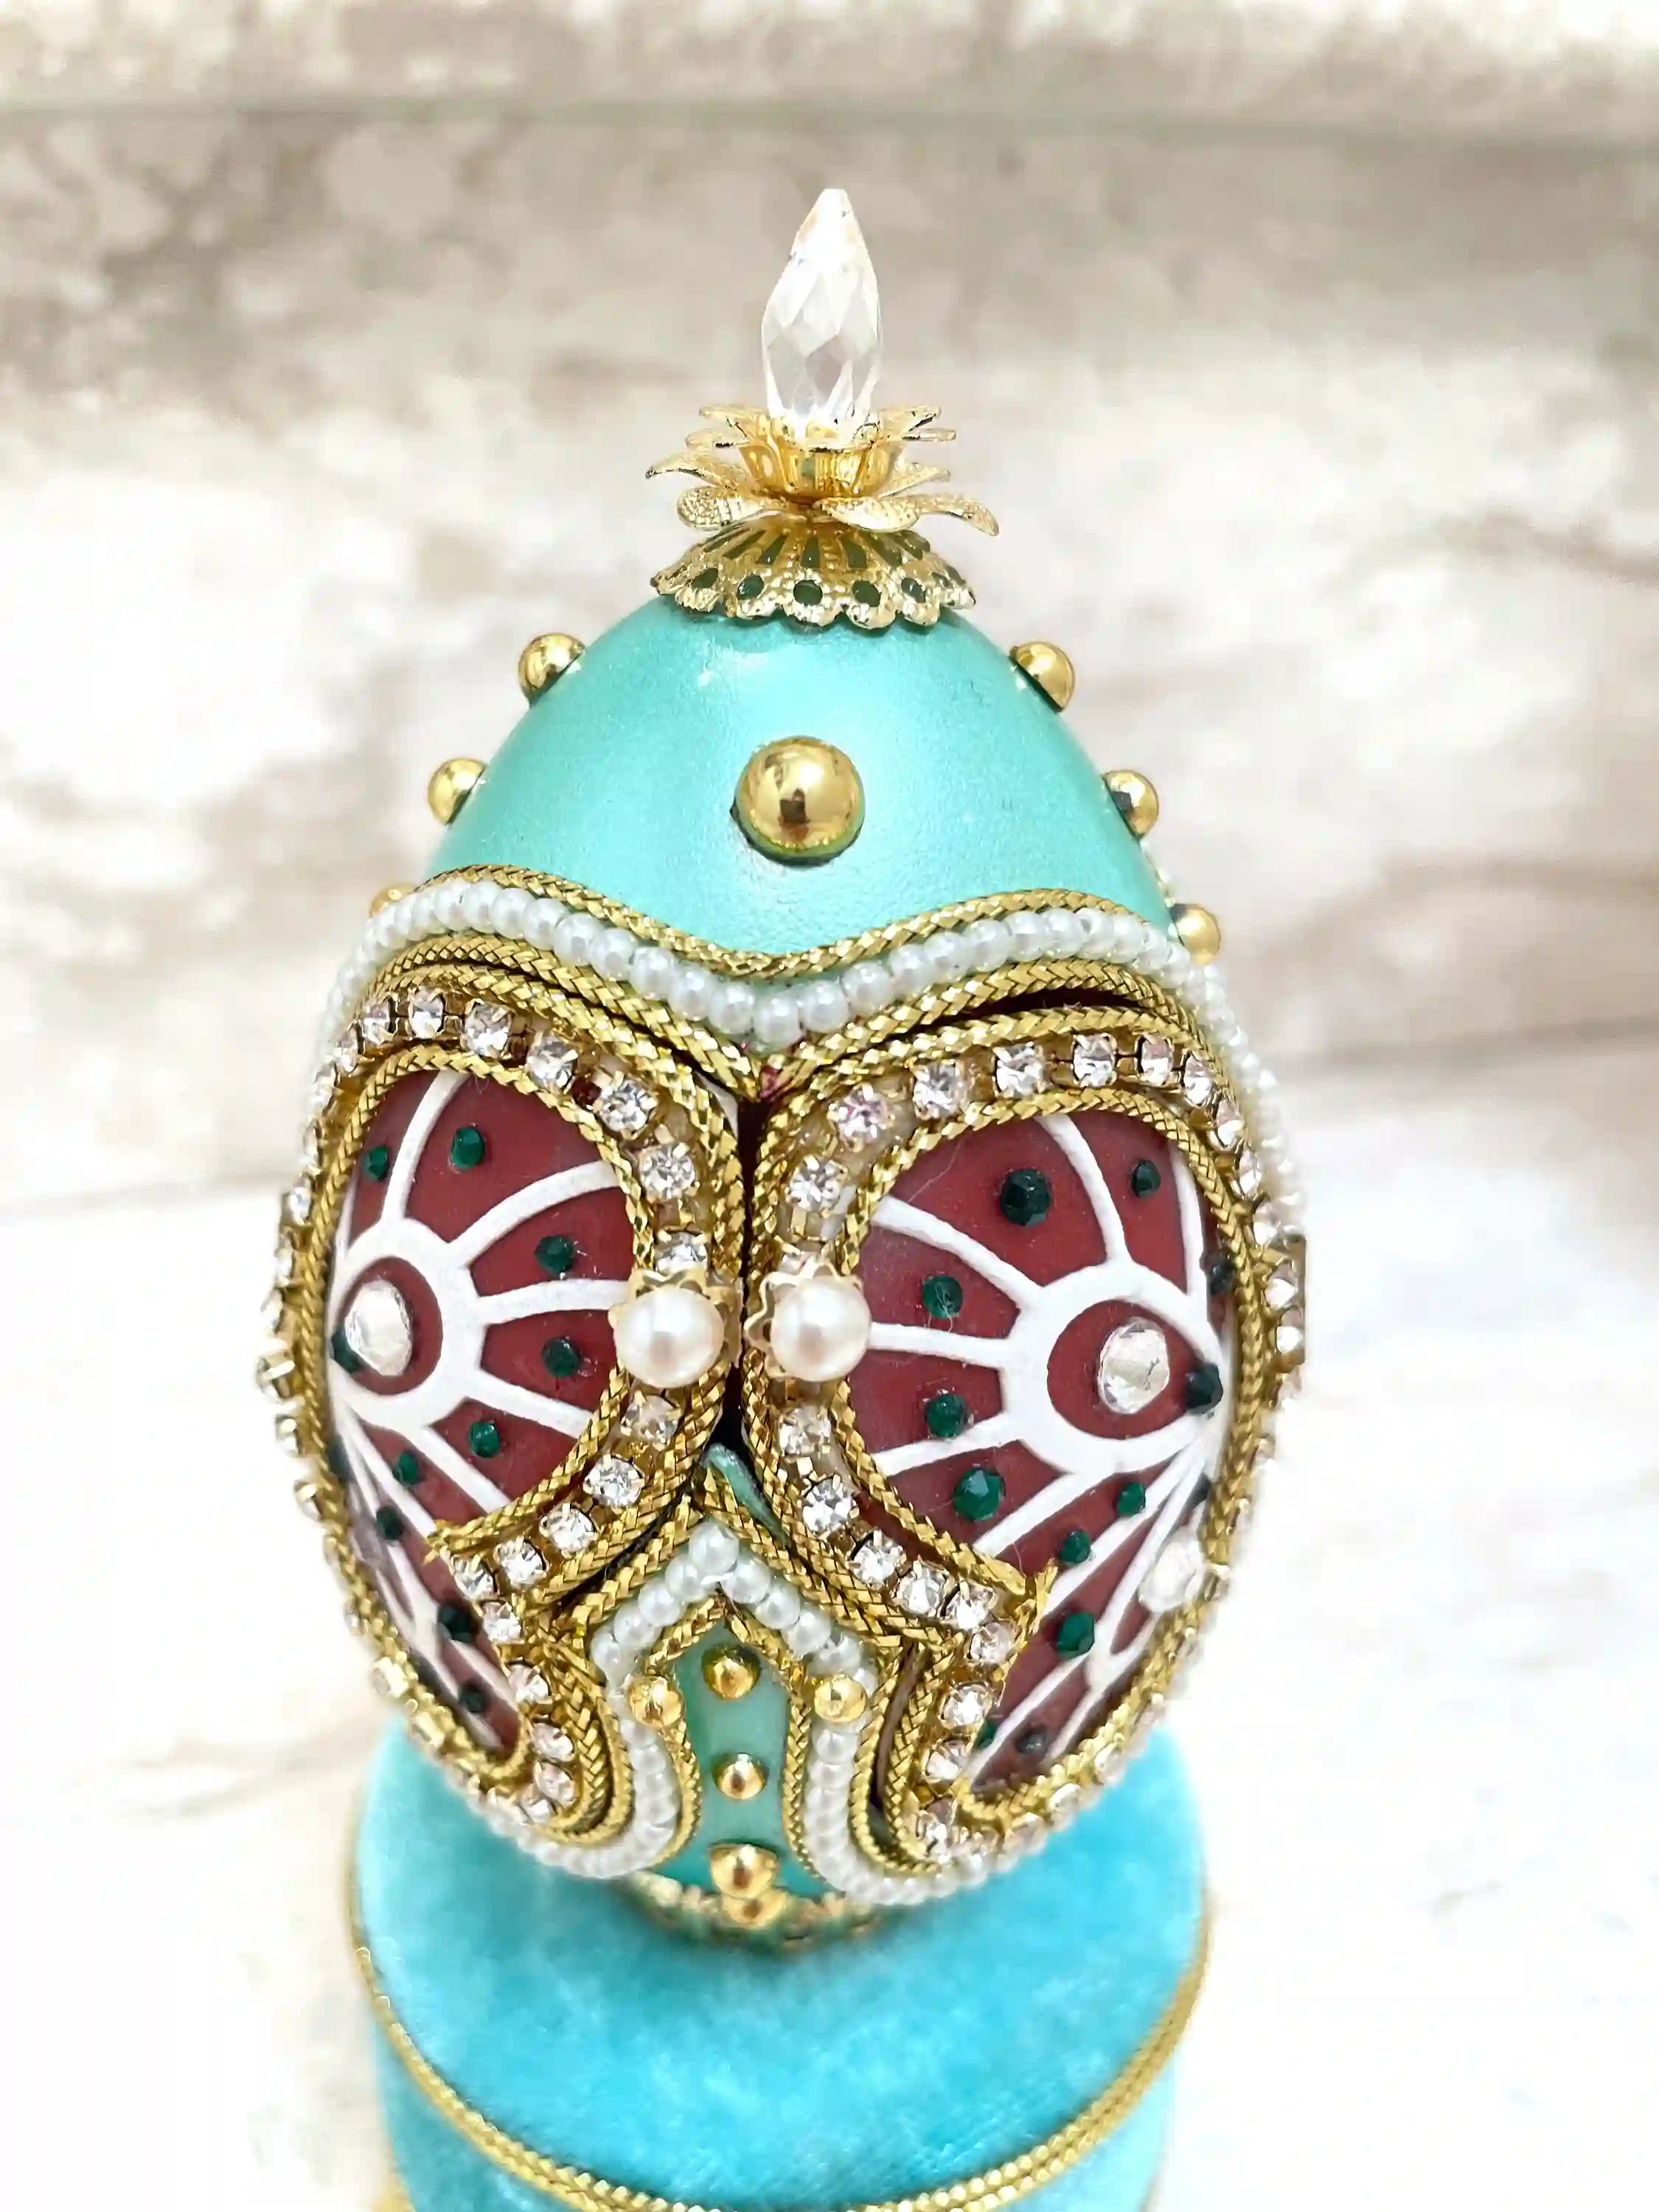 2002 Imperial Faberge Egg ANTIQUE Faberge style Egg Butterfly & Faberge NECKLACE Faberge Musical Egg Faberge Ornament 21st Birthday present 